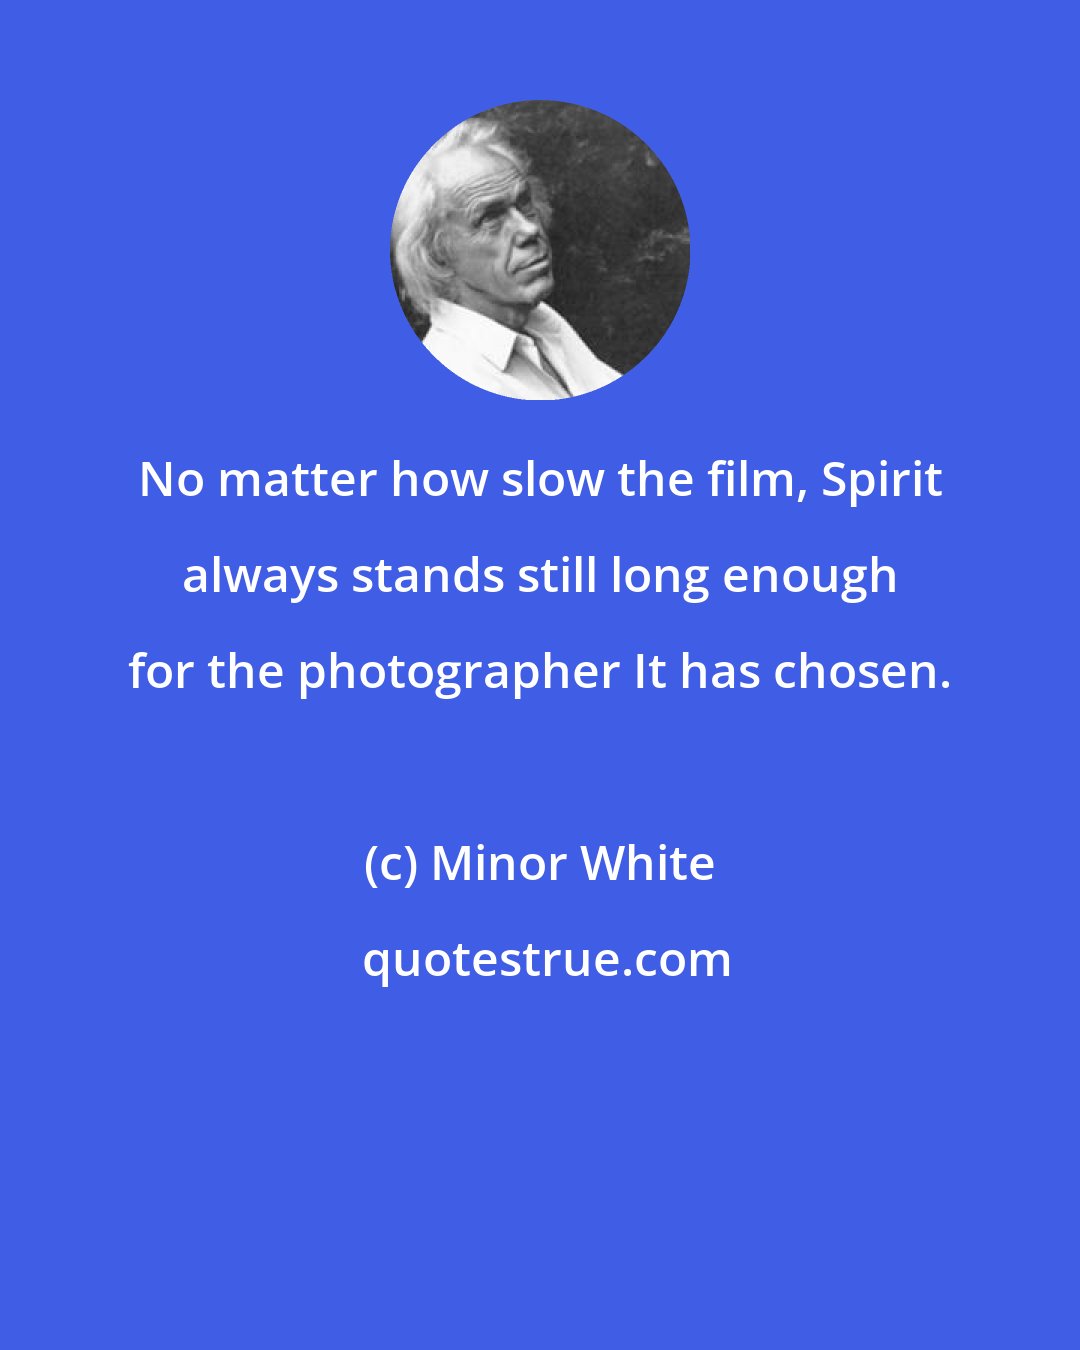 Minor White: No matter how slow the film, Spirit always stands still long enough for the photographer It has chosen.